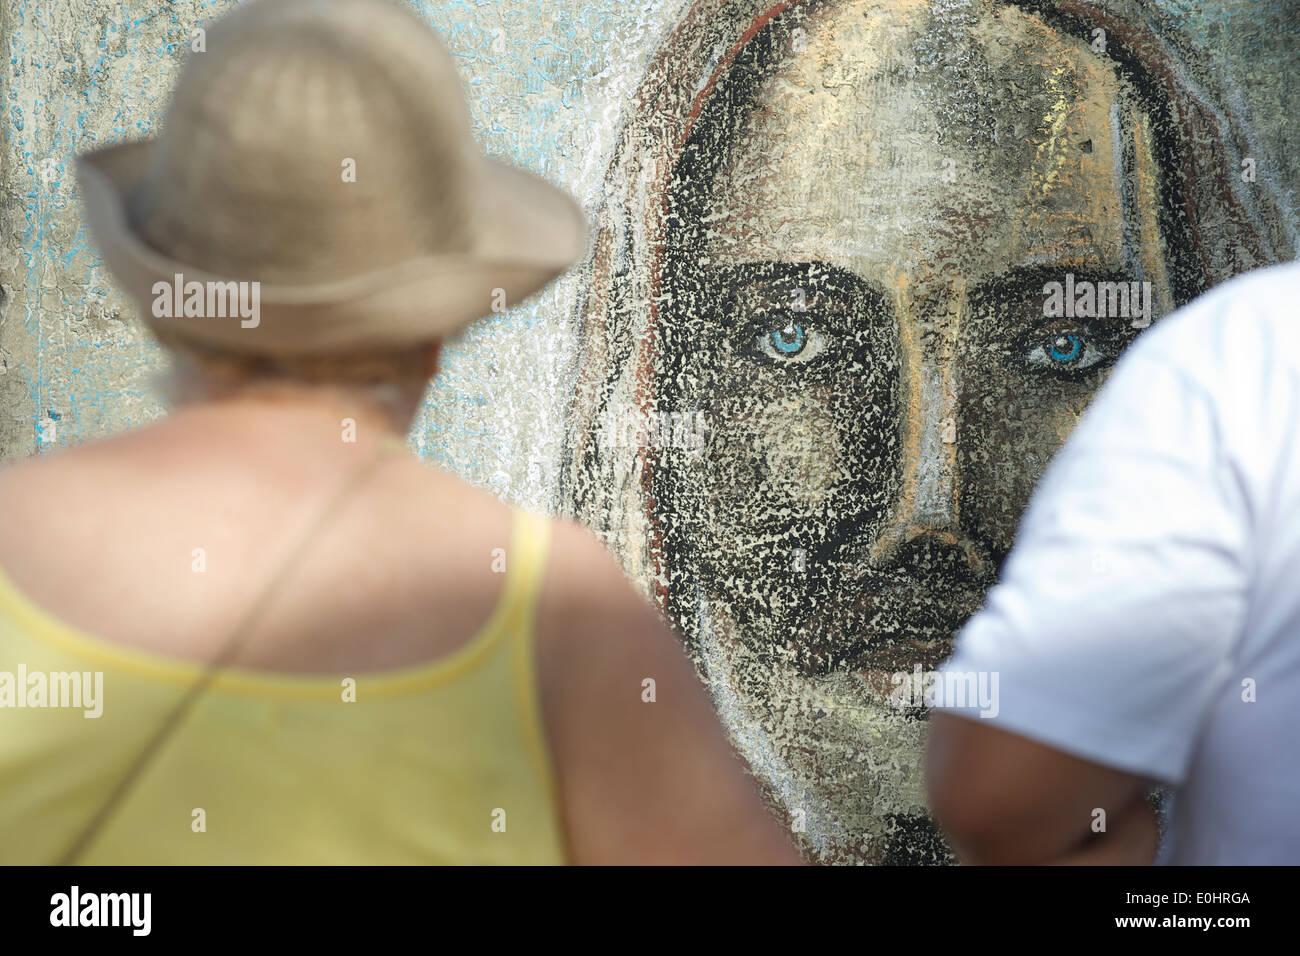 Tourists look at graffiti portrait of Christ the Redeemer at Arpoador, the capital of surf, skate, and graffiti culture in the c Stock Photo